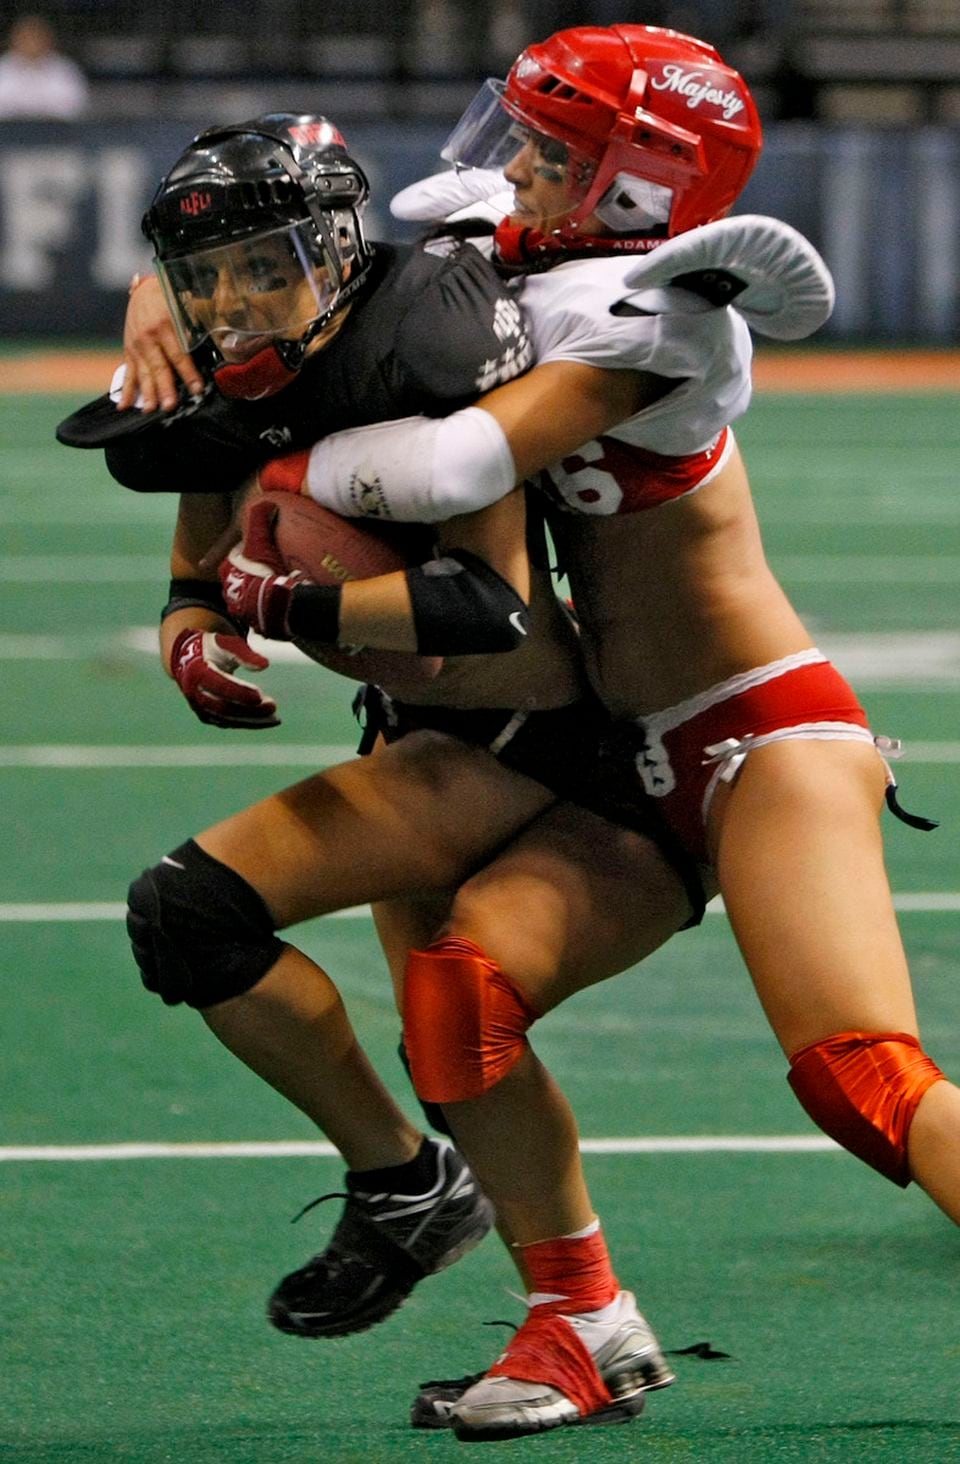 amber plessinger recommends lfl wardrobe malfunctions pic